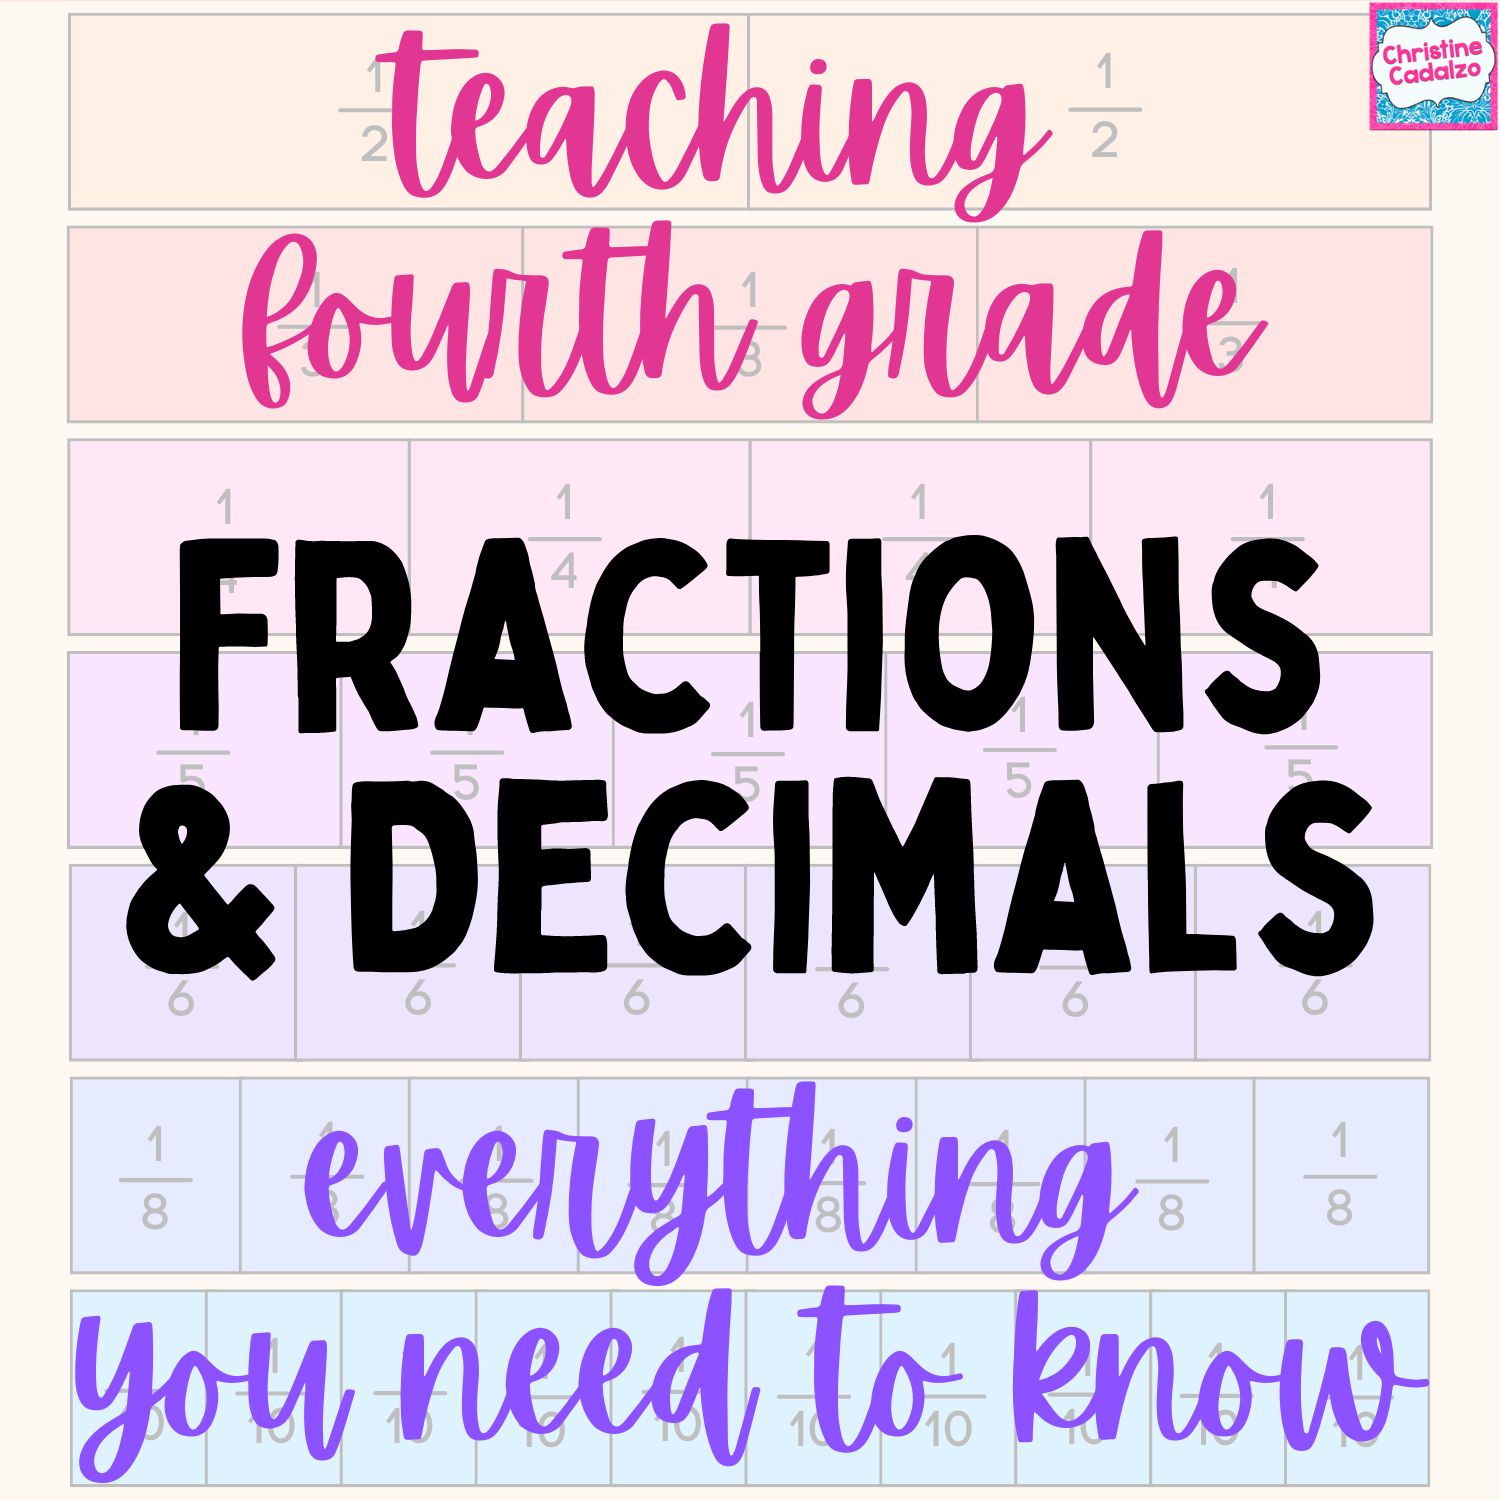 Teaching Fourth Grade Fractions & Decimals: Everything you Need to Know